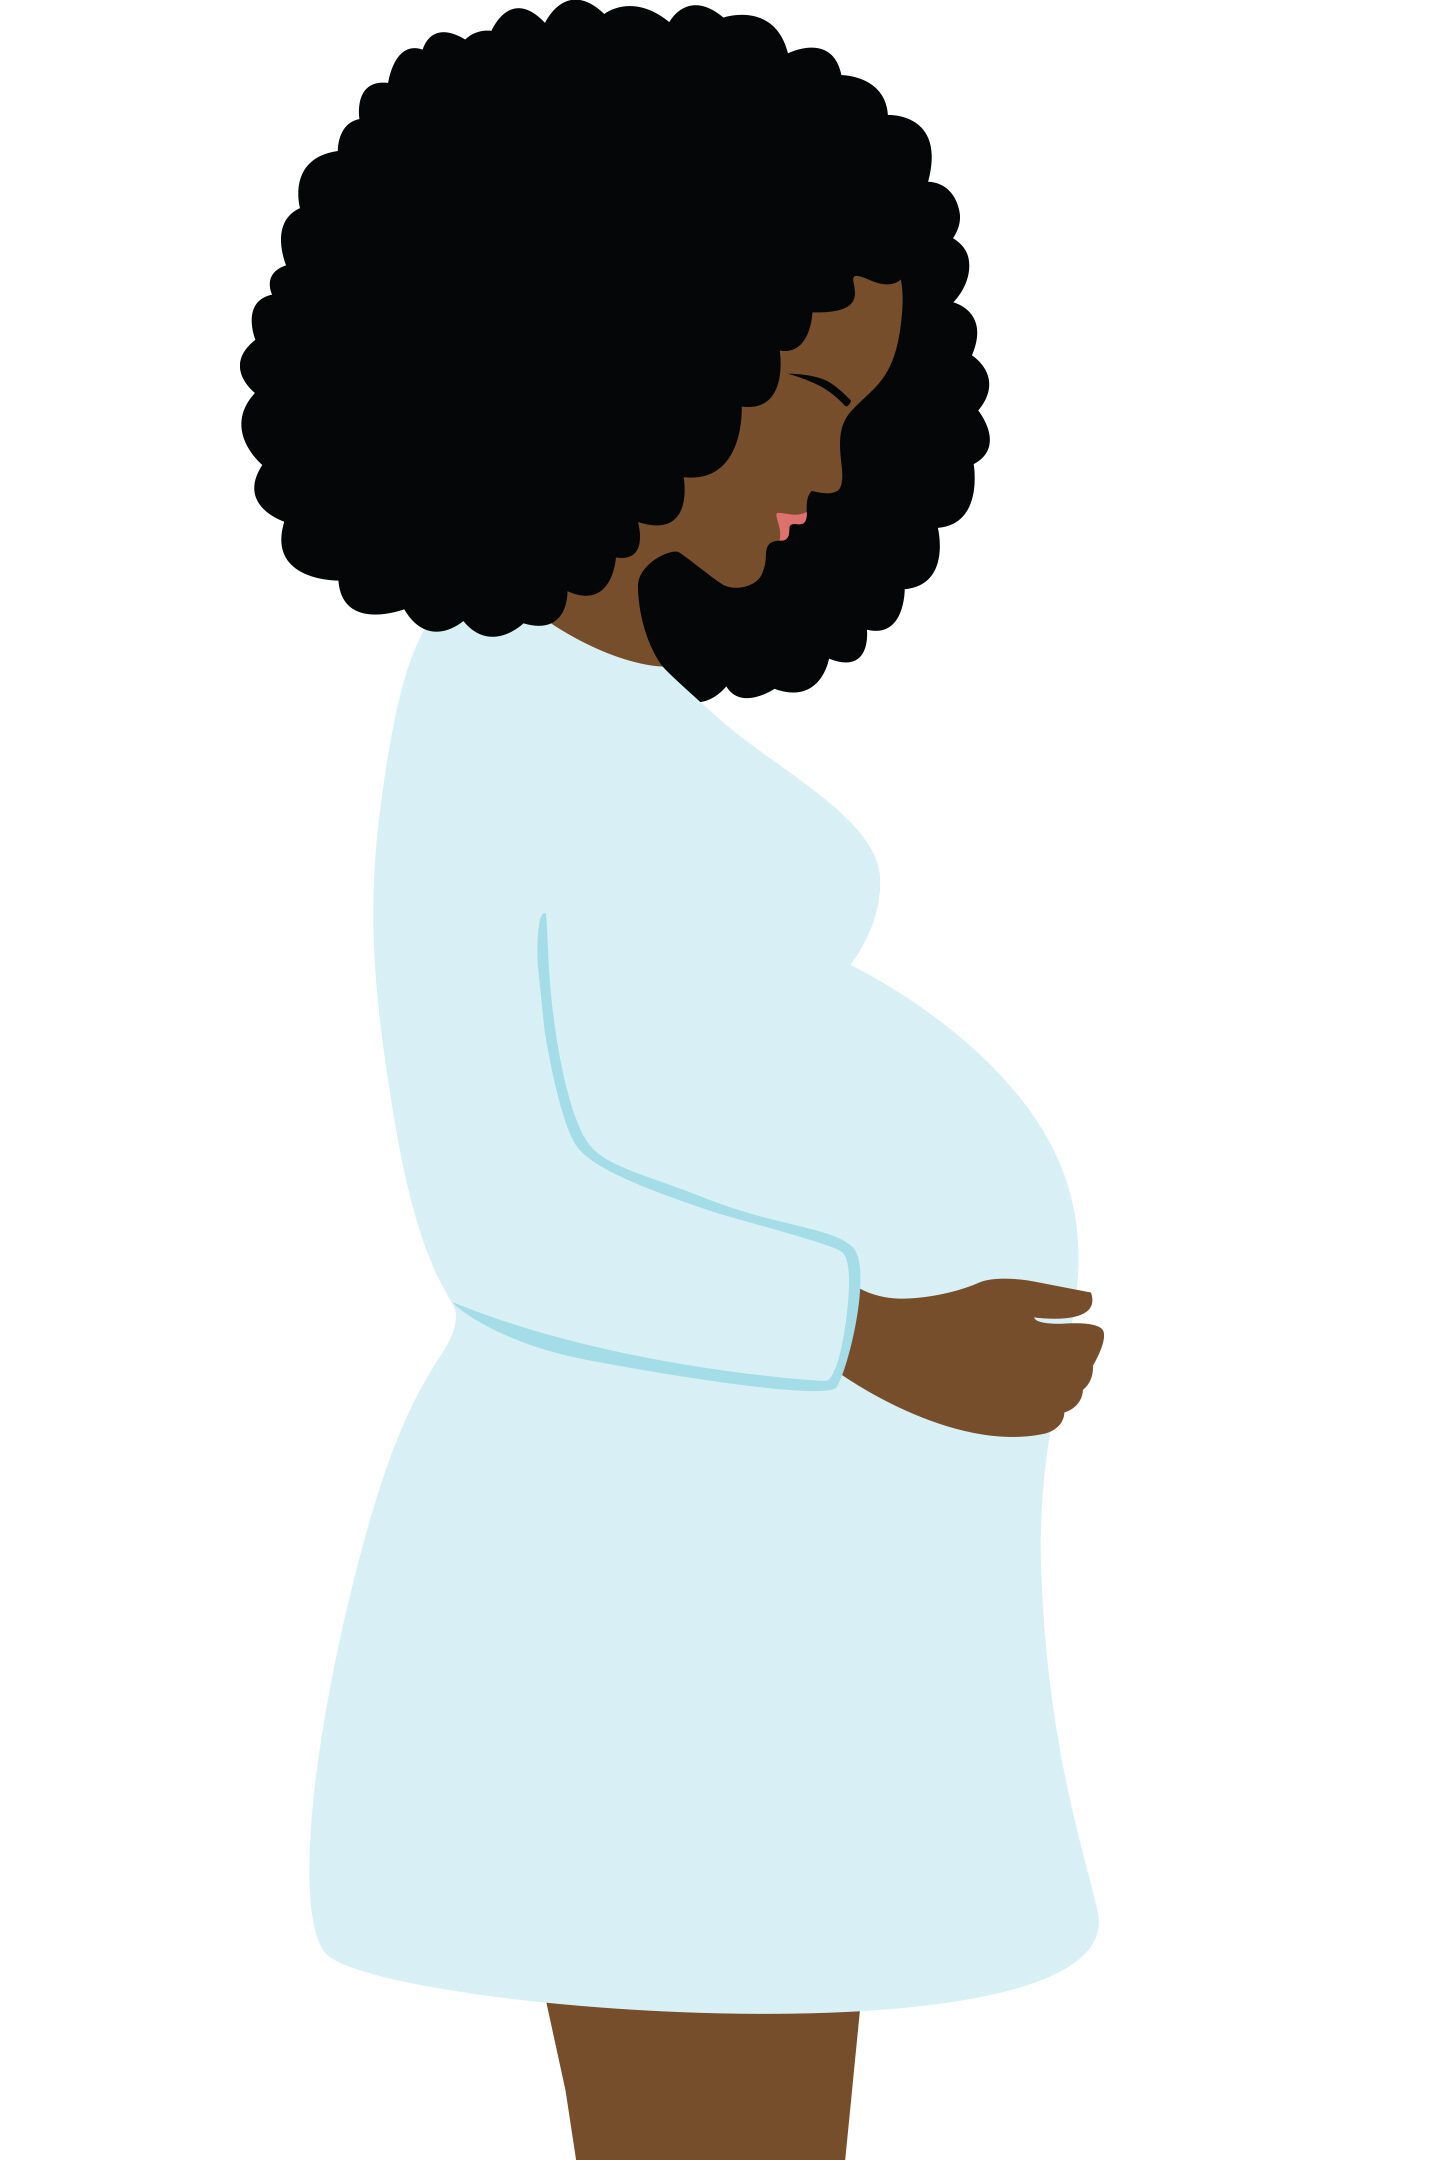 Illustrated image of a pregnant woman holding her abdomen